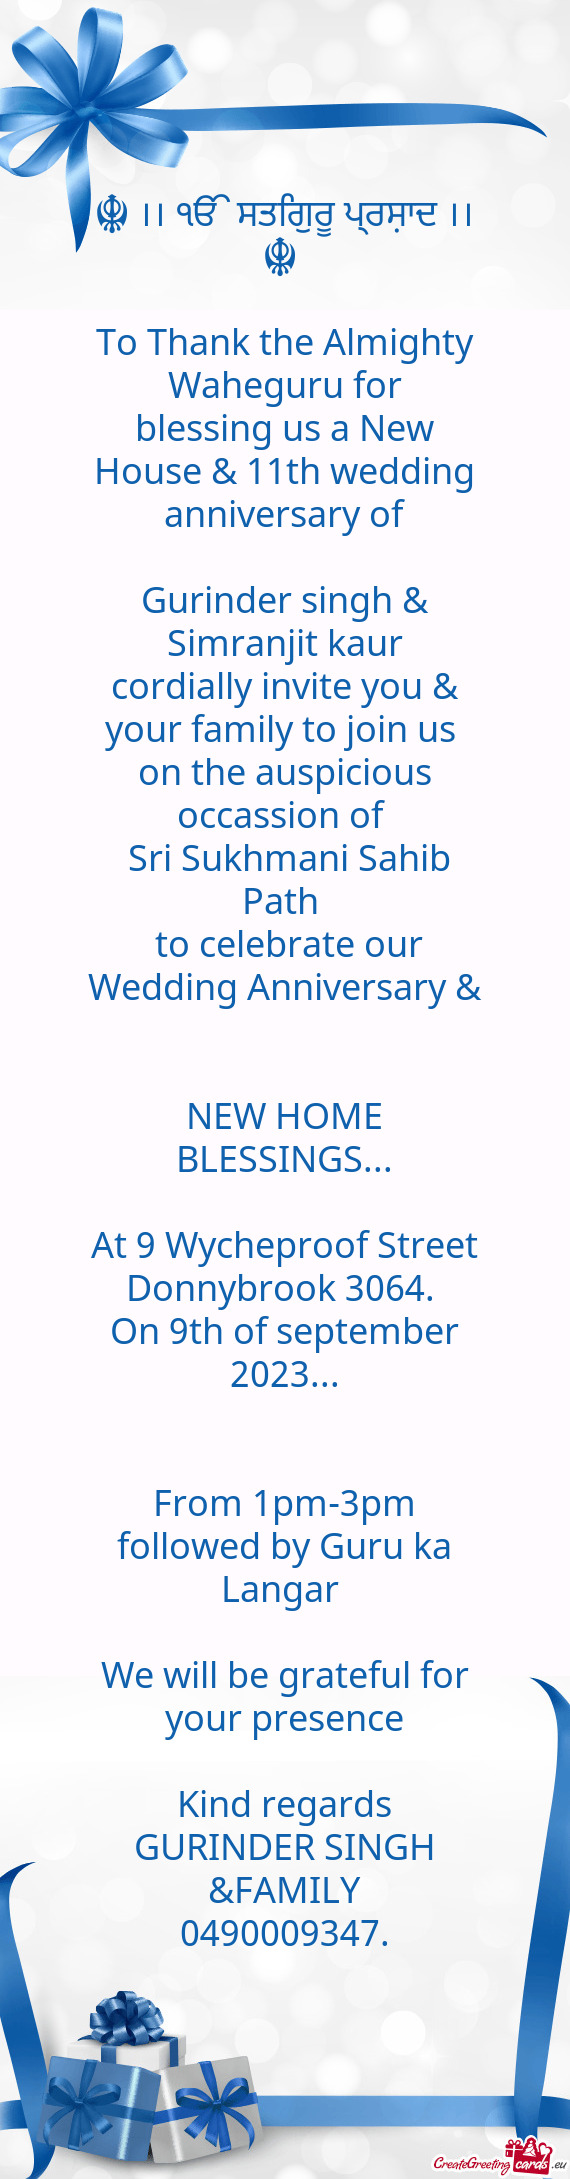 Blessing us a New House & 11th wedding anniversary of